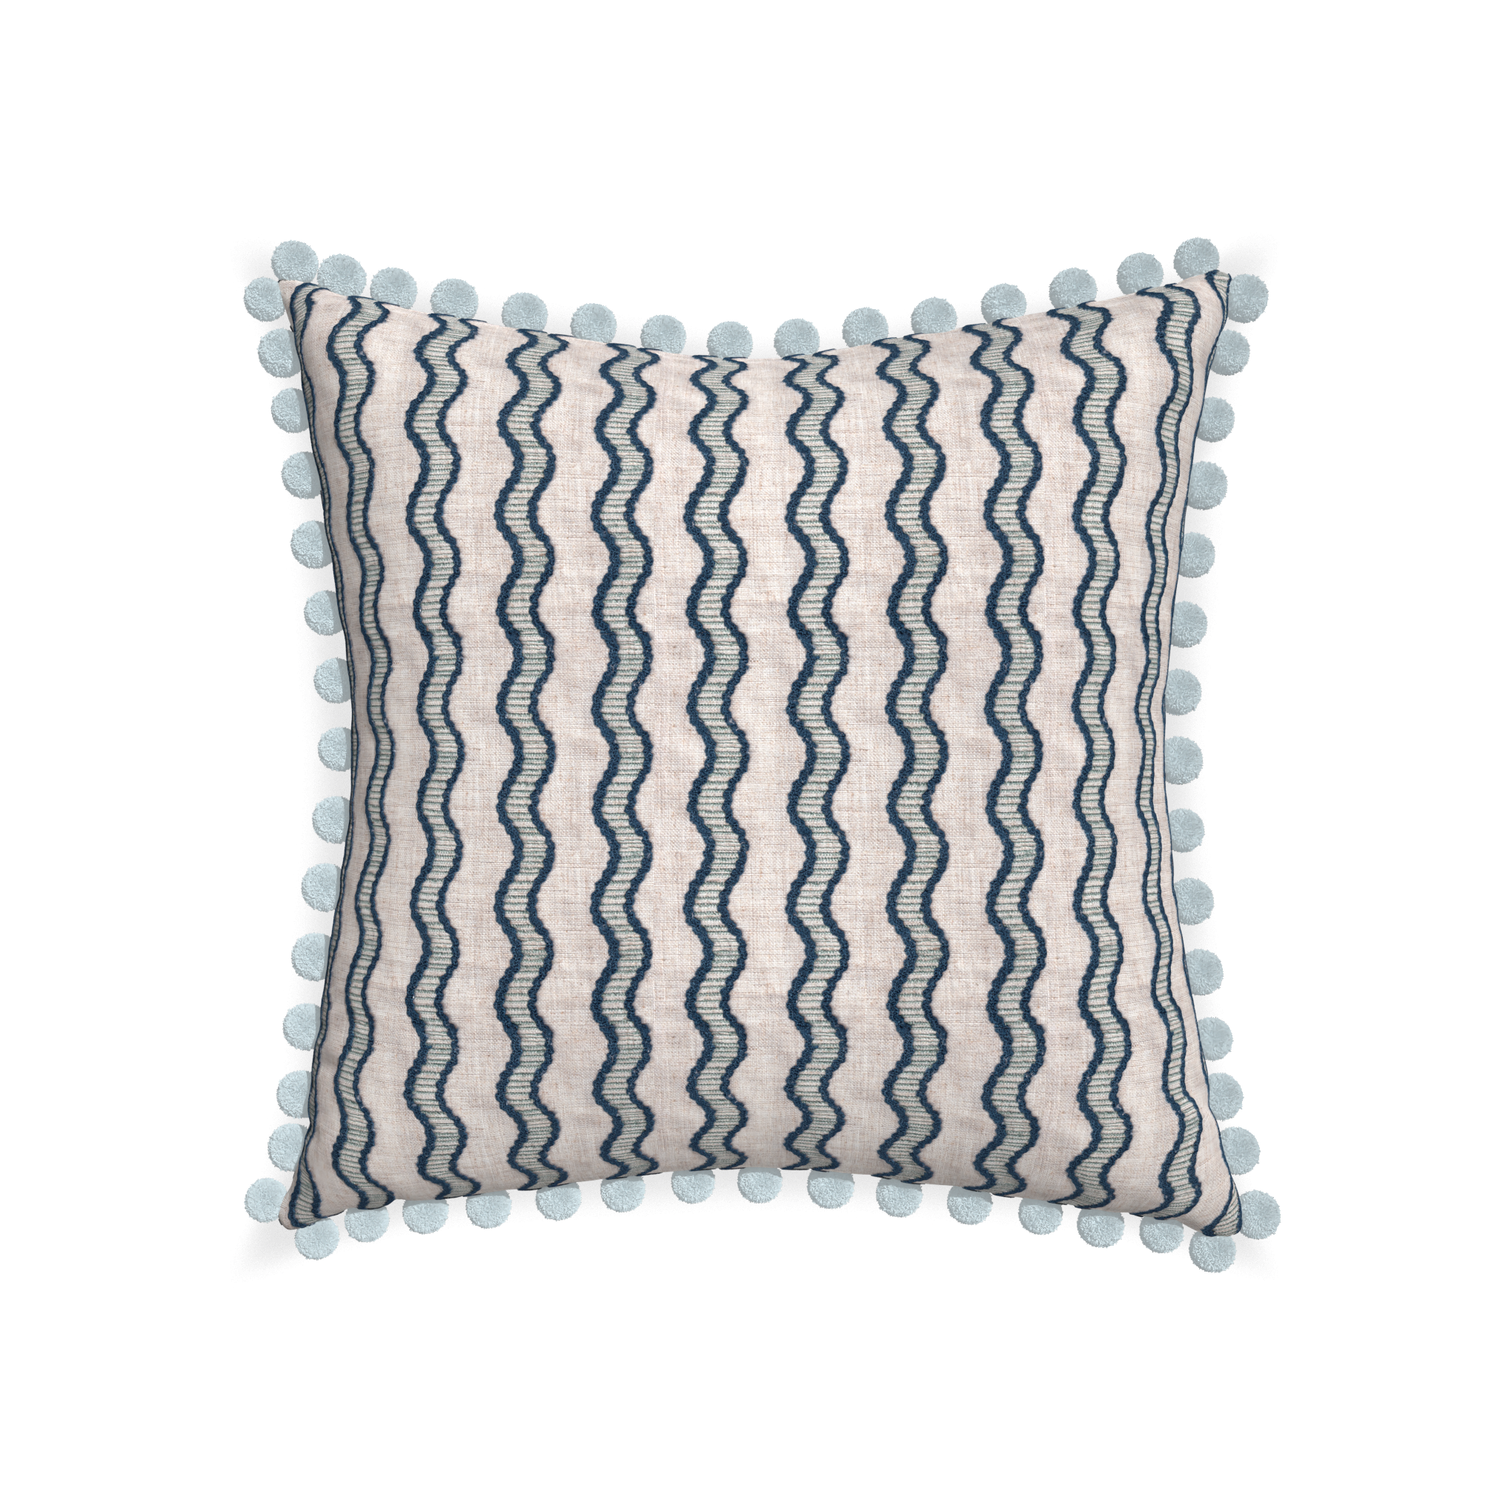 22-square beatrice custom embroidered wavepillow with powder pom pom on white background